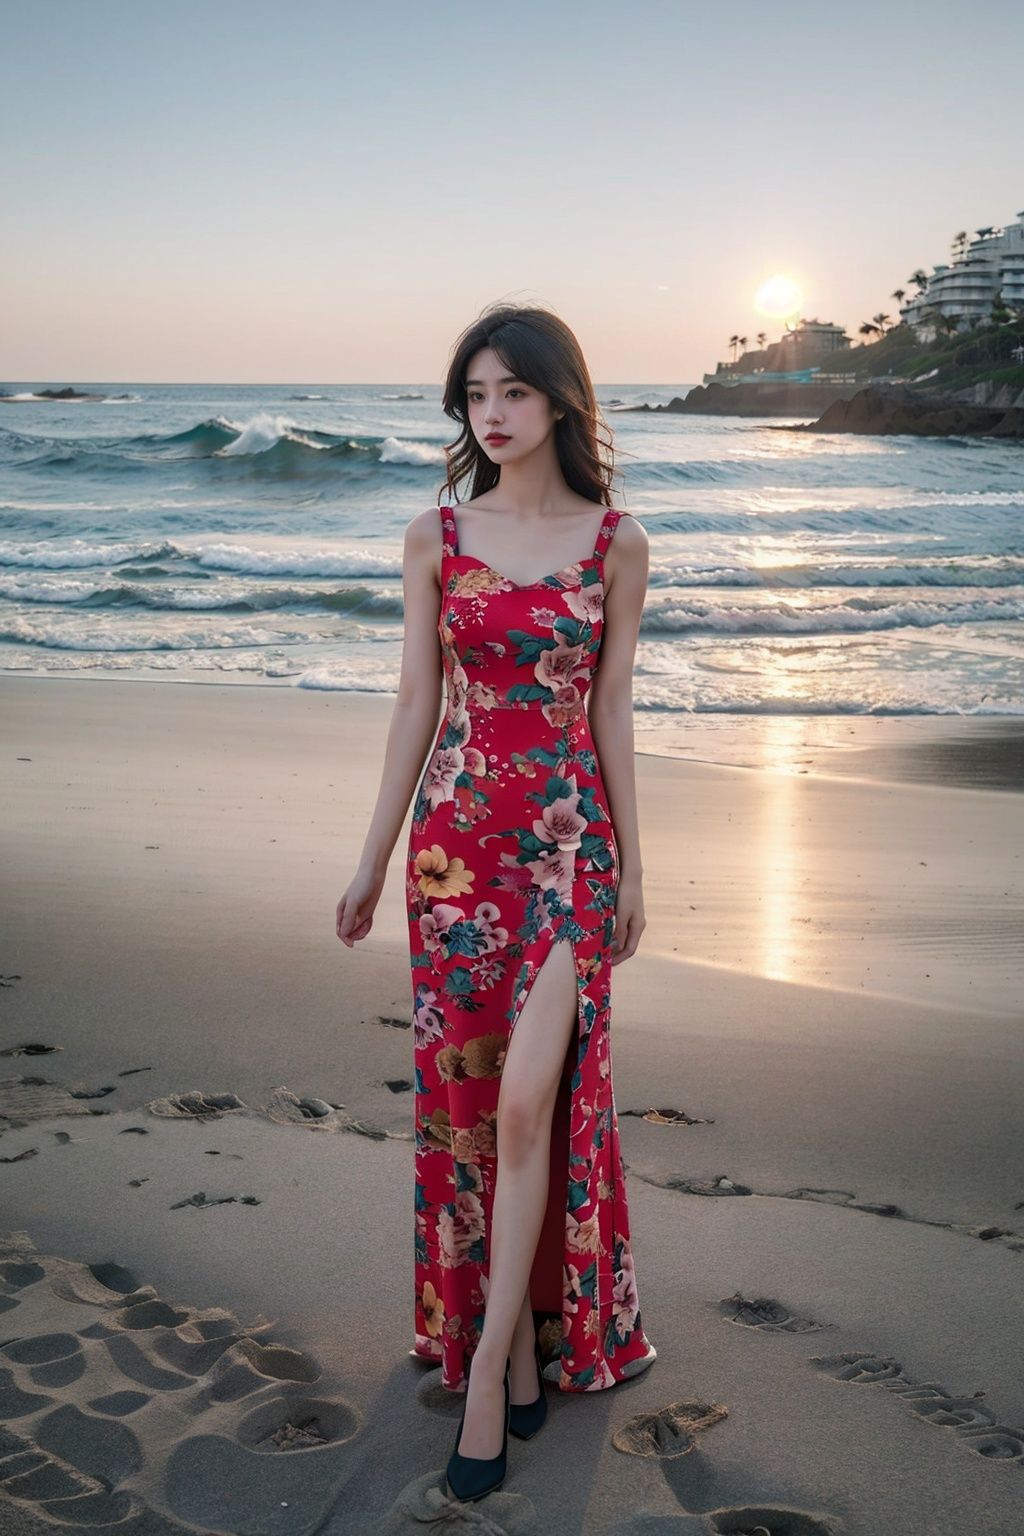  ((masterpiece)), ((best quality)), 8k, high detailed, ultra-detailed, (20-year-old girl), (dress), (strap dress), (on the beach), (solo), (seaside), (sunset), (golden hour), (ocean waves), (sand), (serenity).cuihua